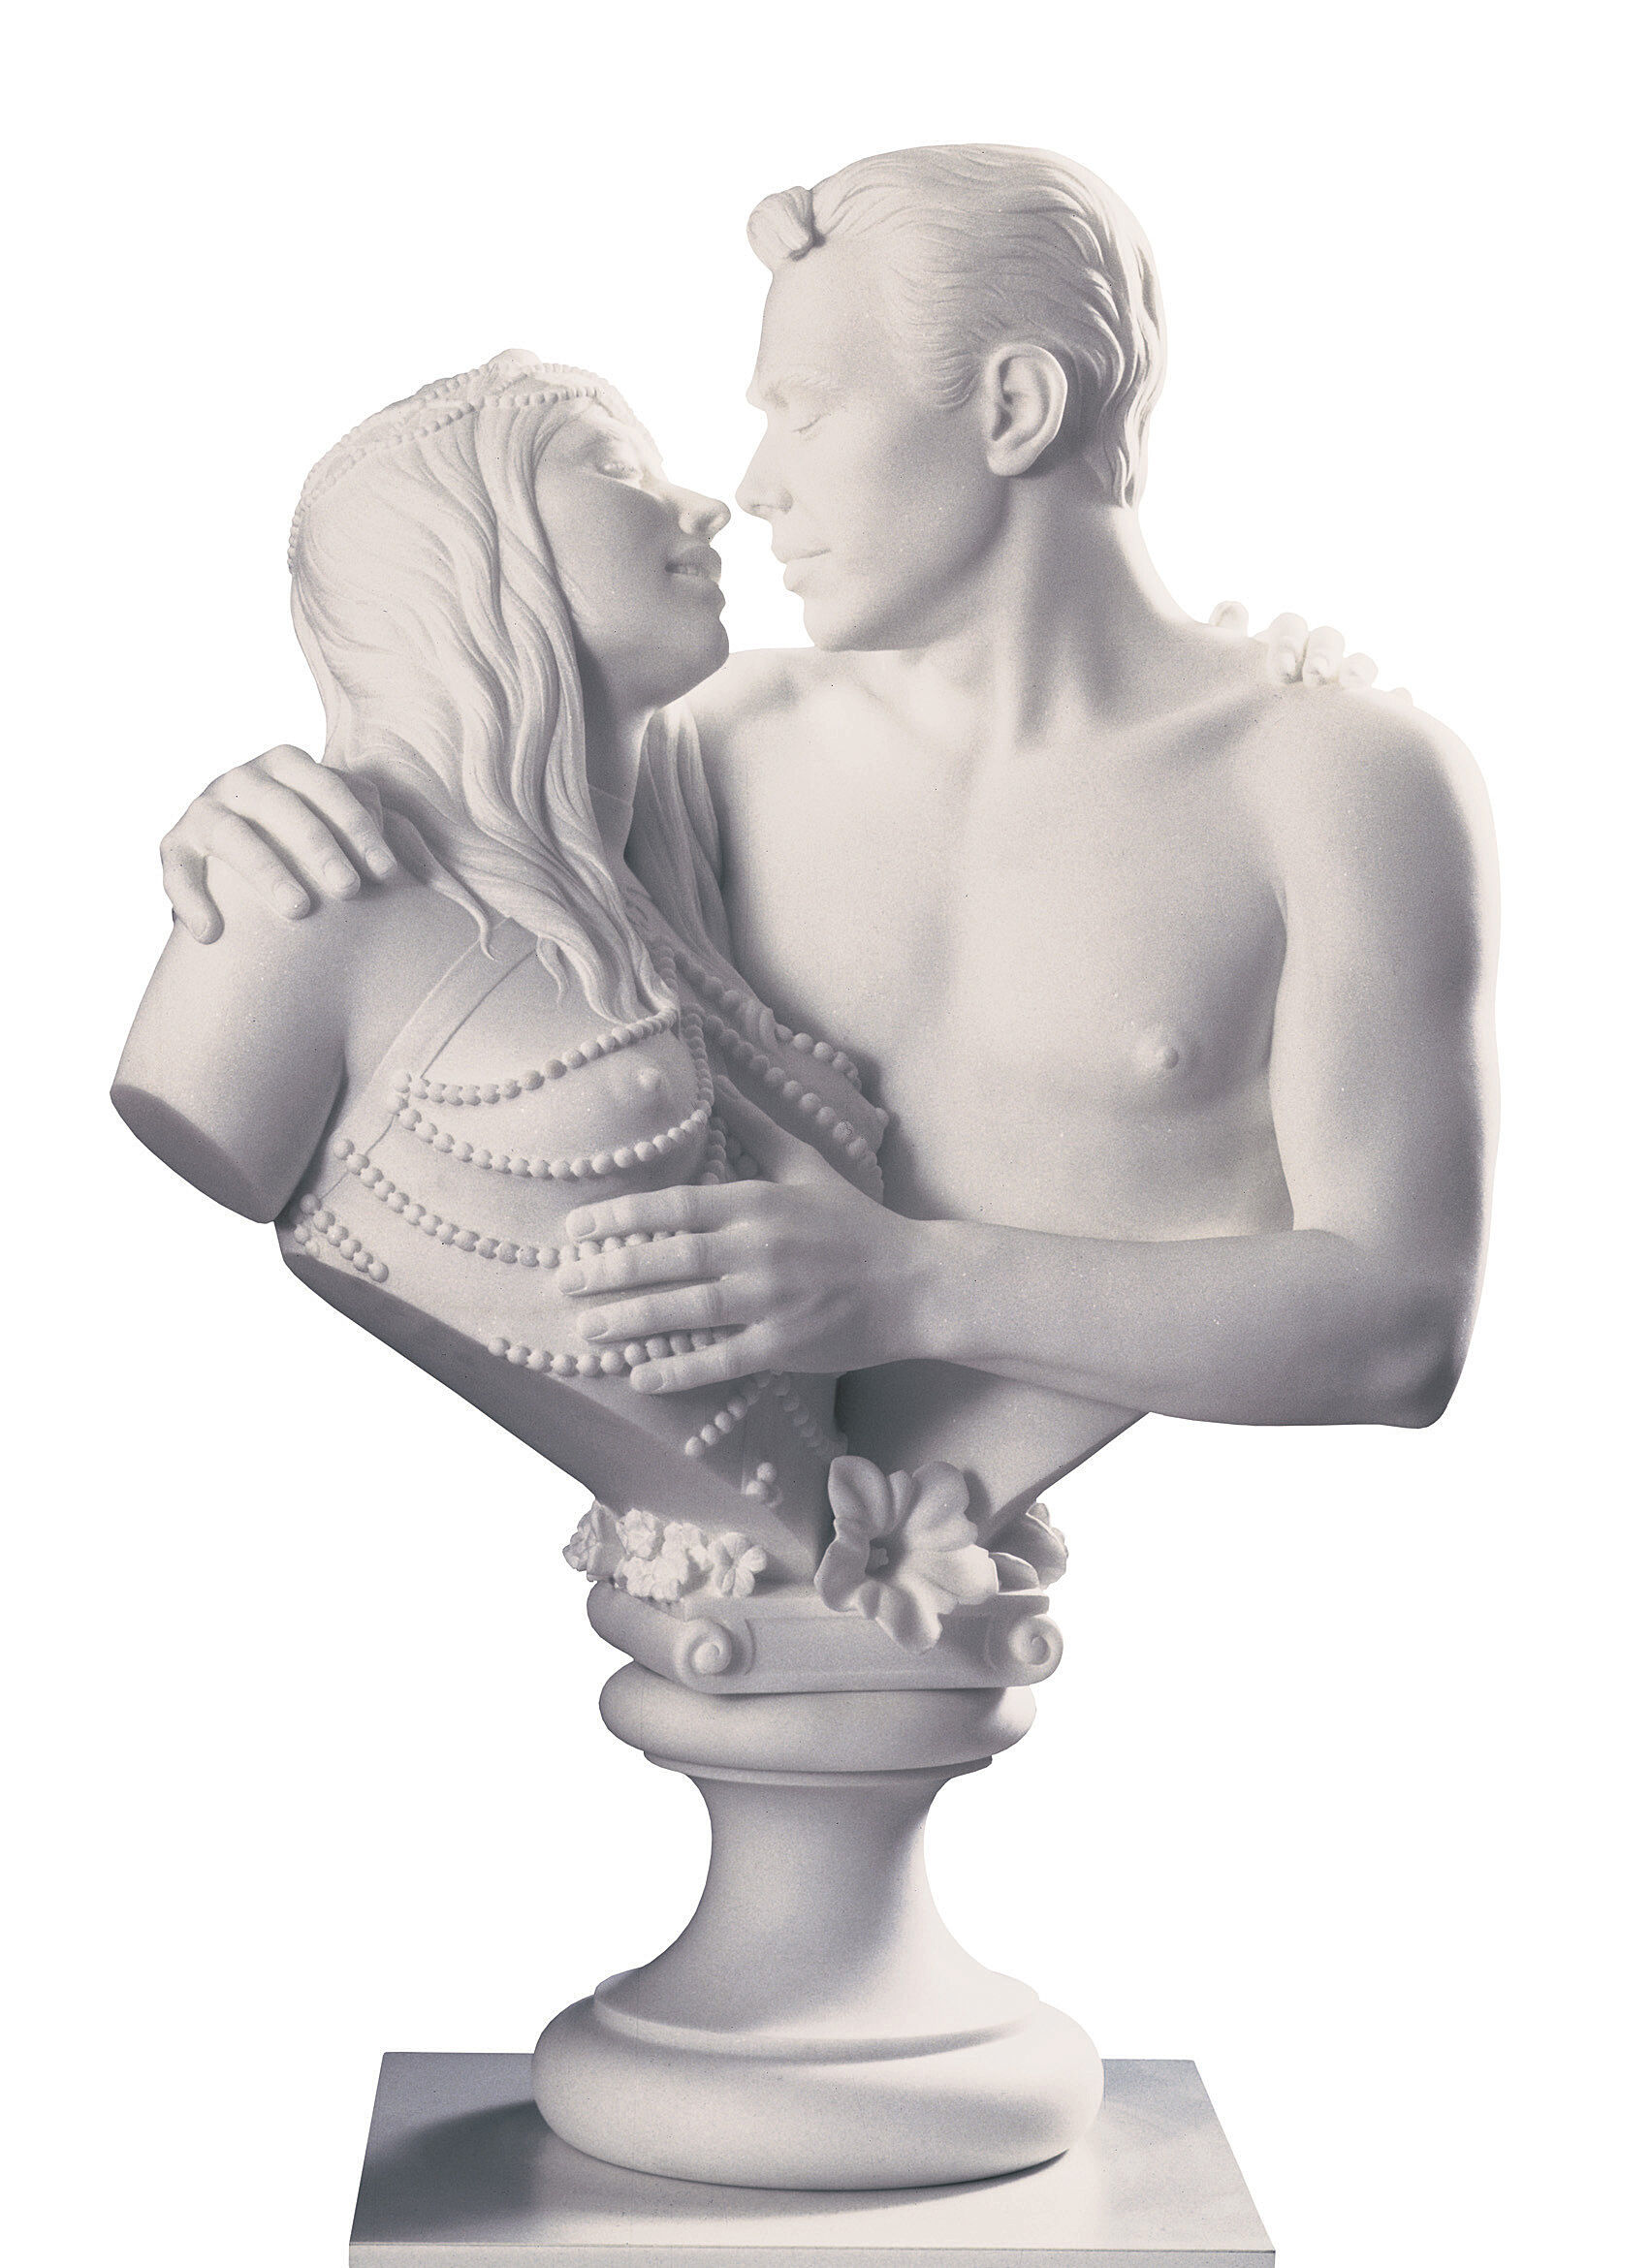 A marble sculpture of a man and woman embracing, with the woman adorned in beaded attire and the man shirtless, both gazing into each other's eyes.